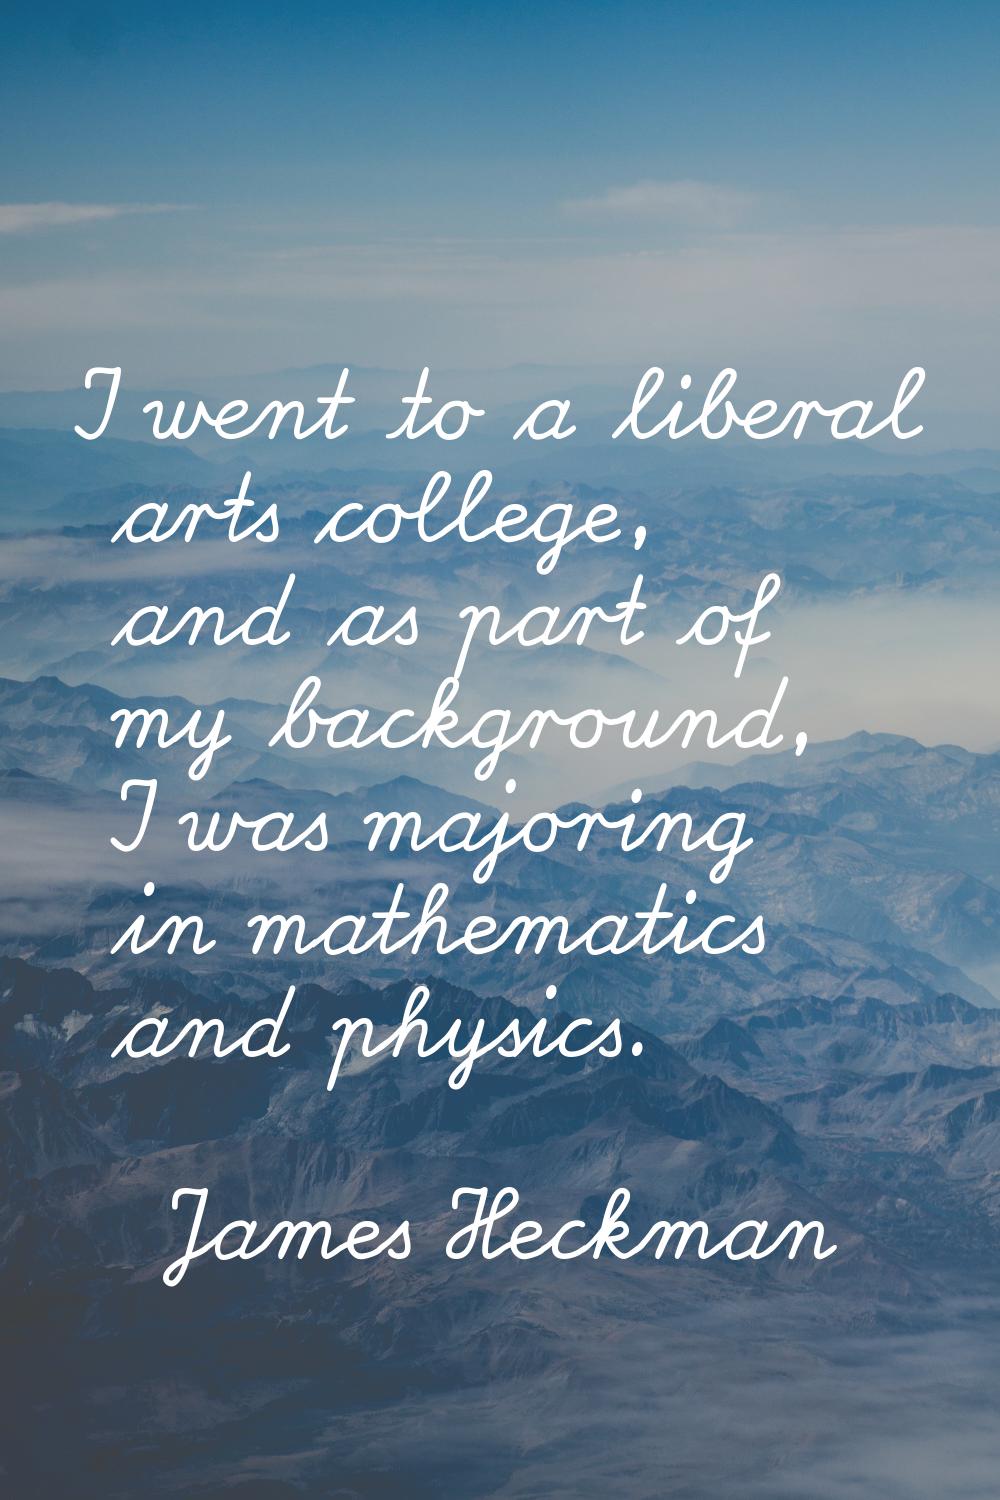 I went to a liberal arts college, and as part of my background, I was majoring in mathematics and p